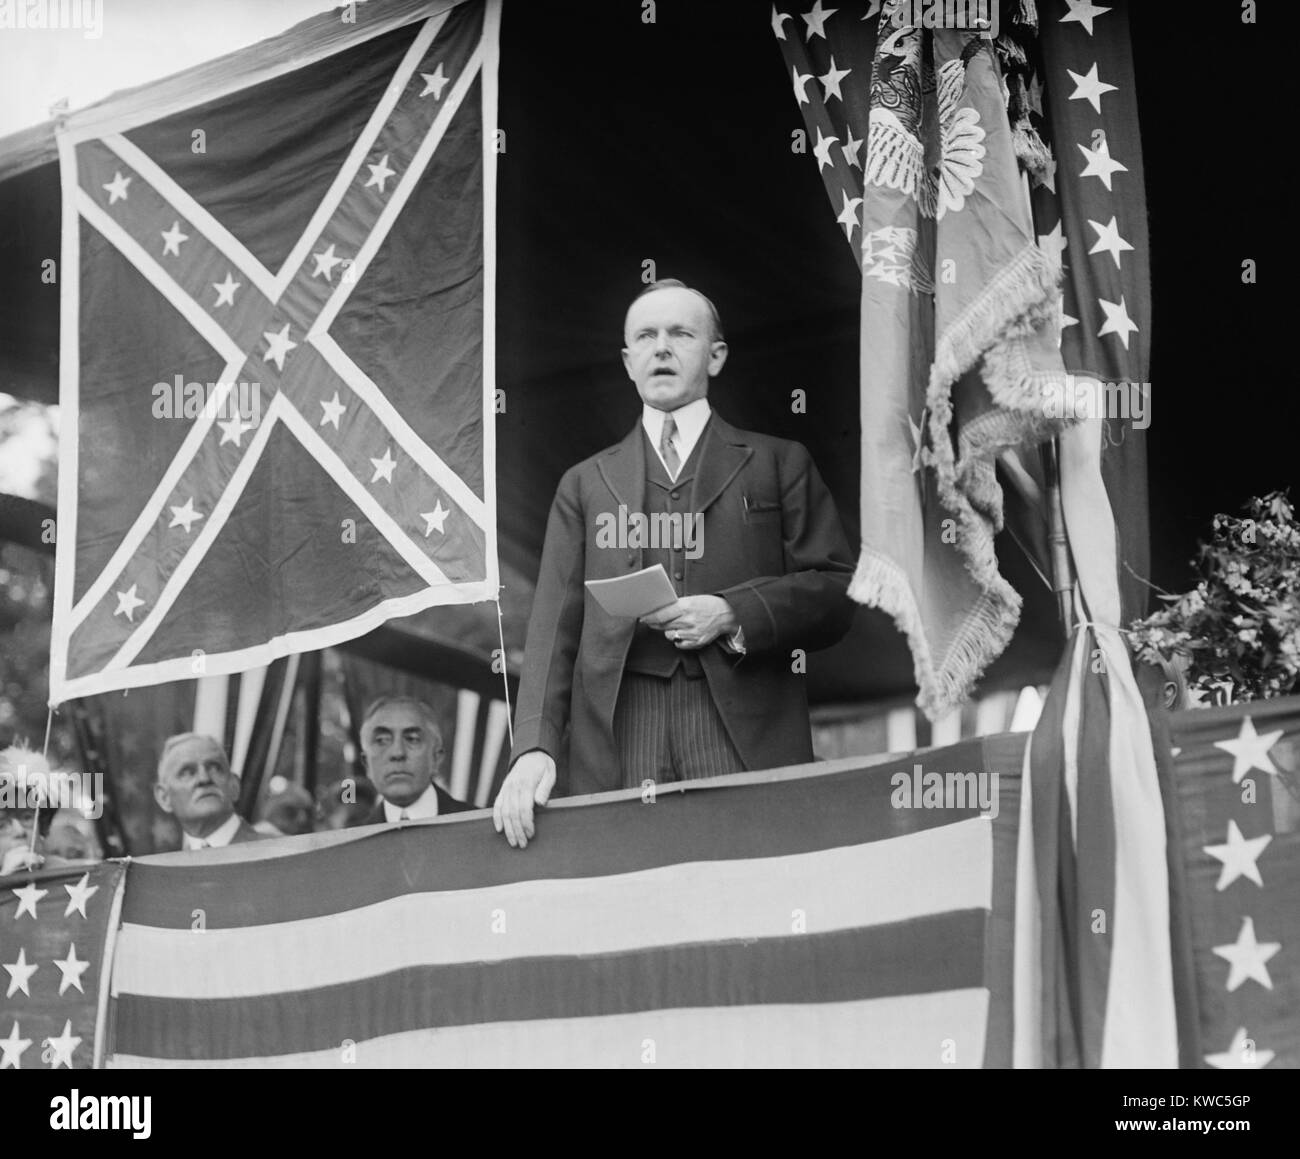 President Calvin Coolidge speaking beside Confederate flag at Arlington Cemetery. May 24, 1924. (BSLOC 2015 15 126) Stock Photo